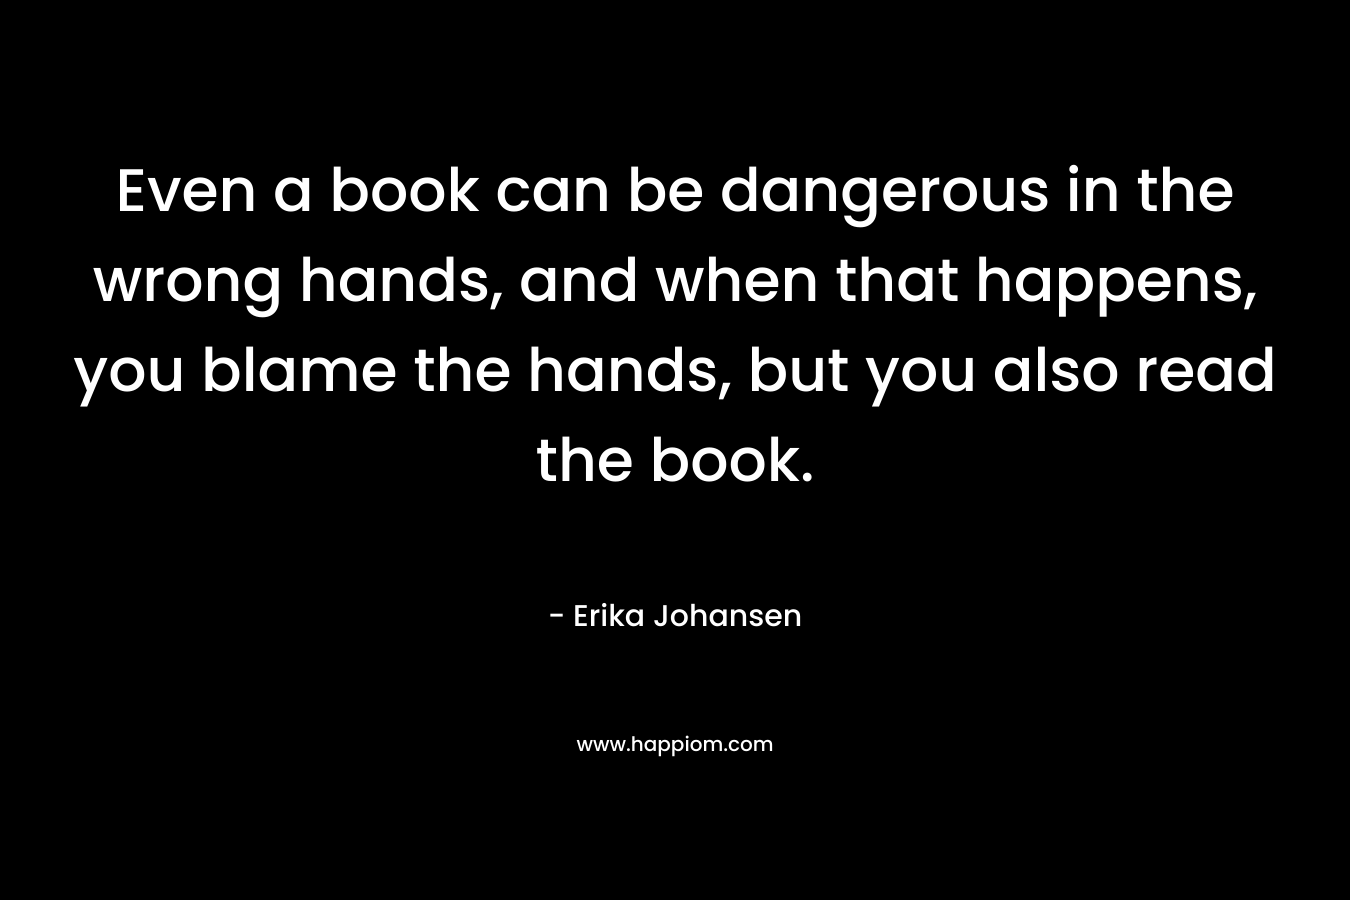 Even a book can be dangerous in the wrong hands, and when that happens, you blame the hands, but you also read the book.